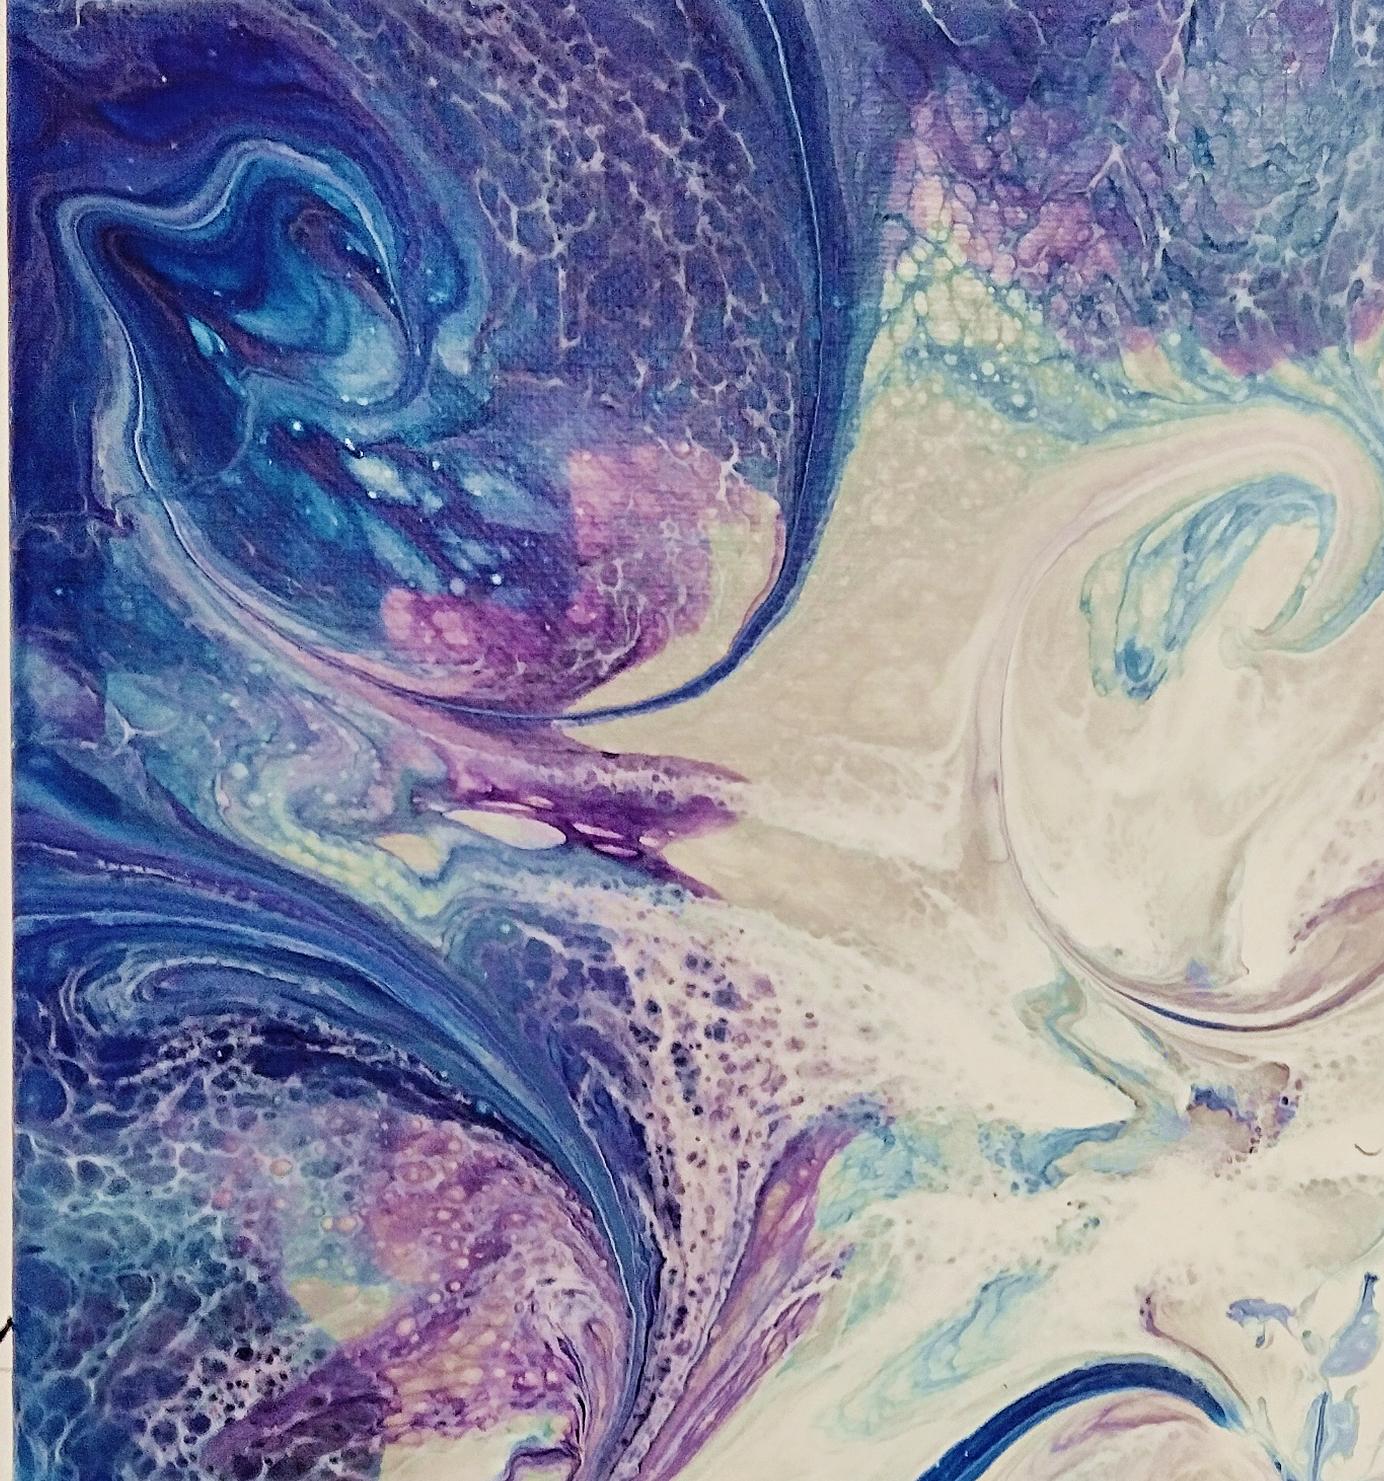 Blue and Purple Swirl I Abstract Acrylic Painting, 12" x 12"